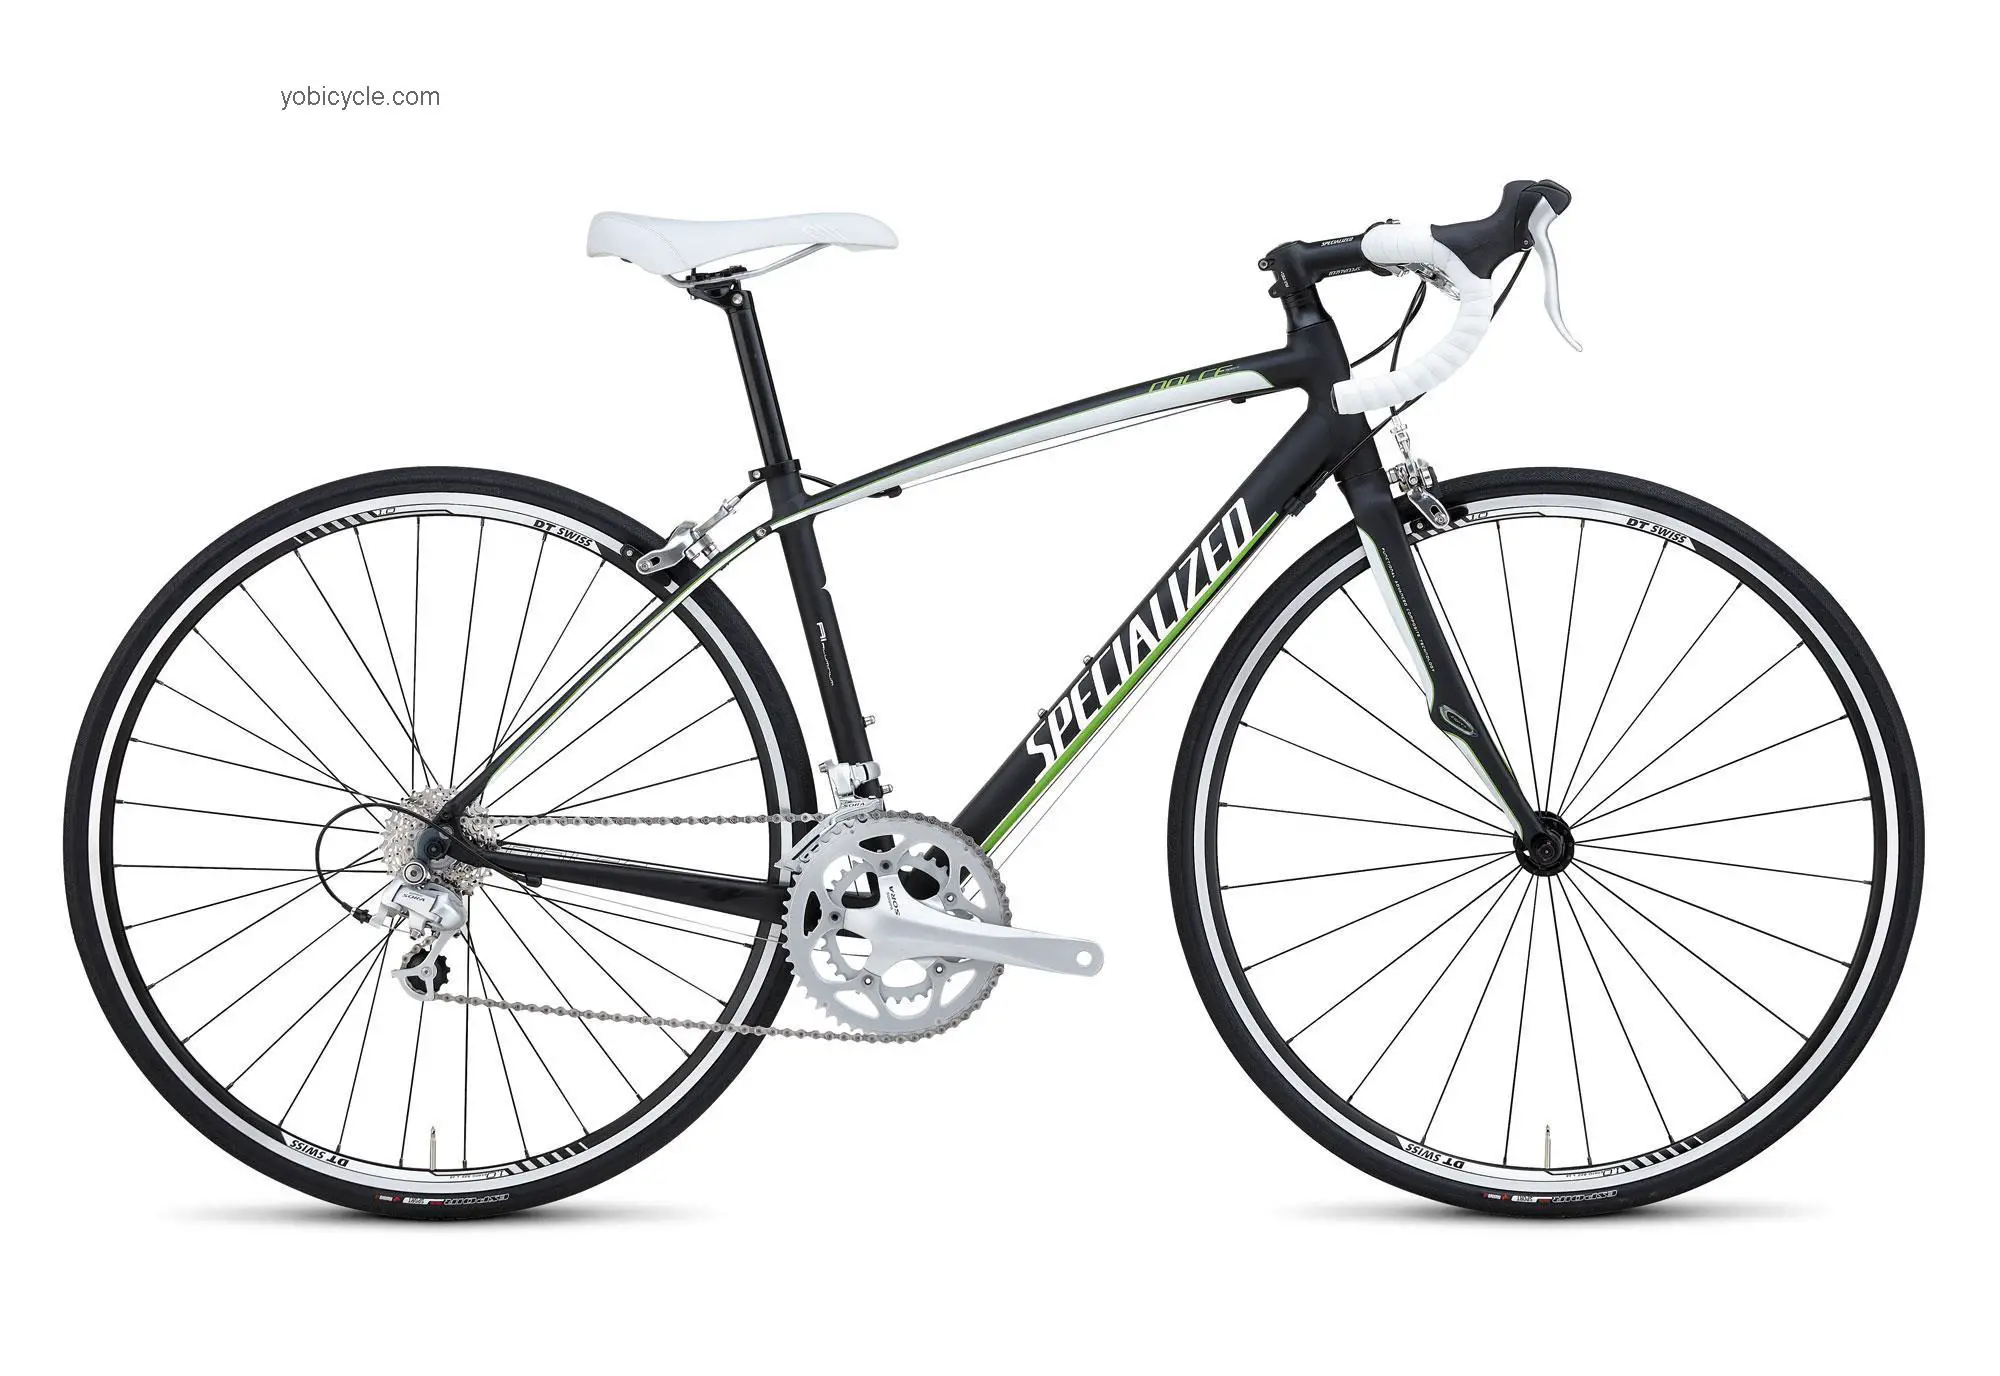 Specialized Dolce Sport Compact 2012 comparison online with competitors